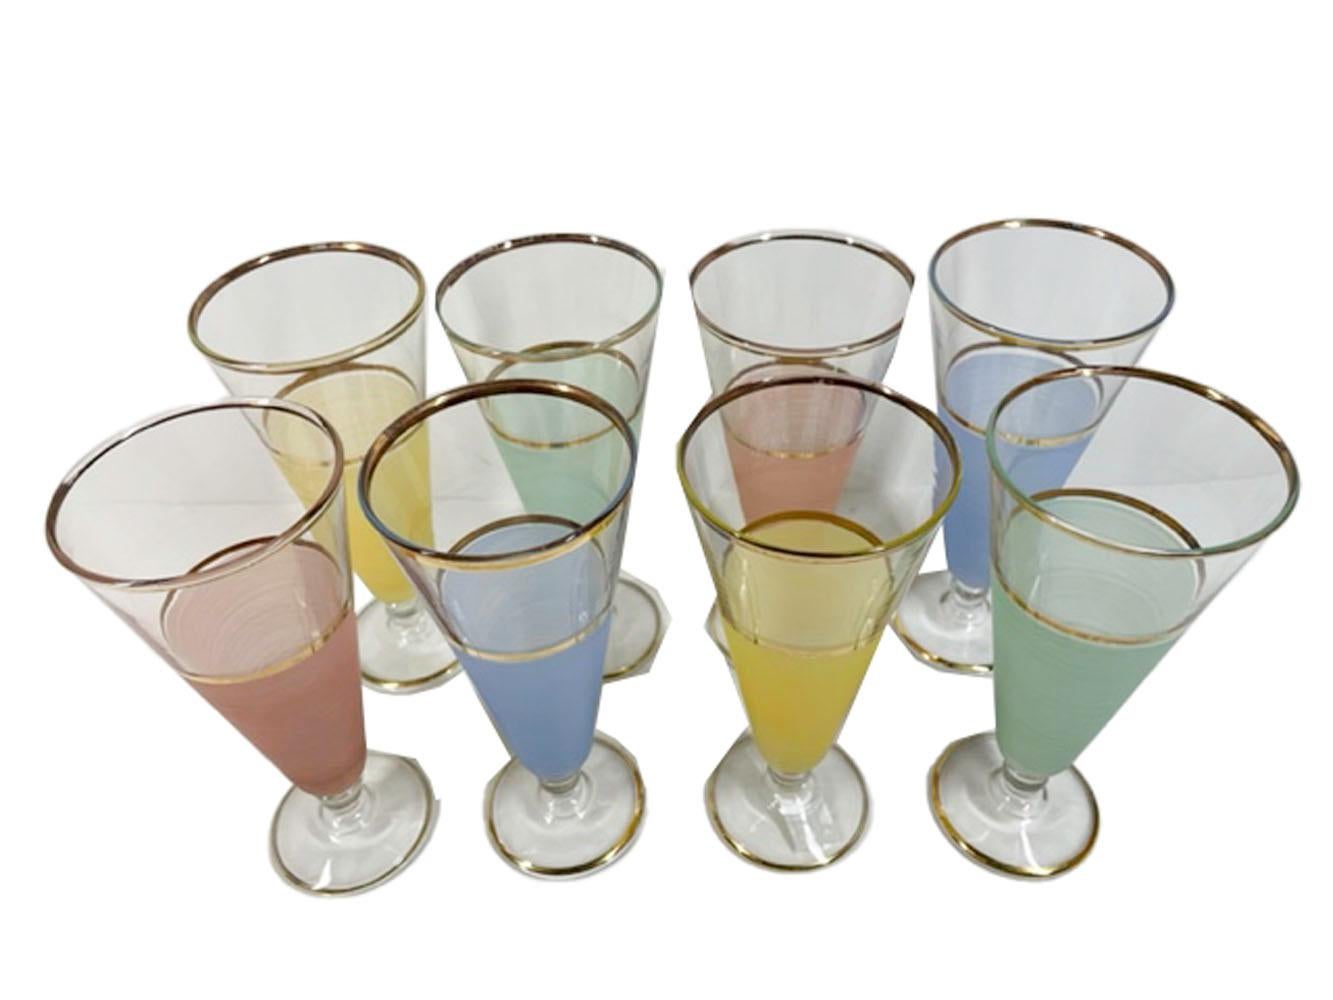 Eight Mid-Century Modern pilsner glasses of taper form, color-frosted lower two thirds below clear tops with 22k gold accent, supported on a ball stem above a raised dome foot. The set is comprised of two each, pink, yellow, green and blue.